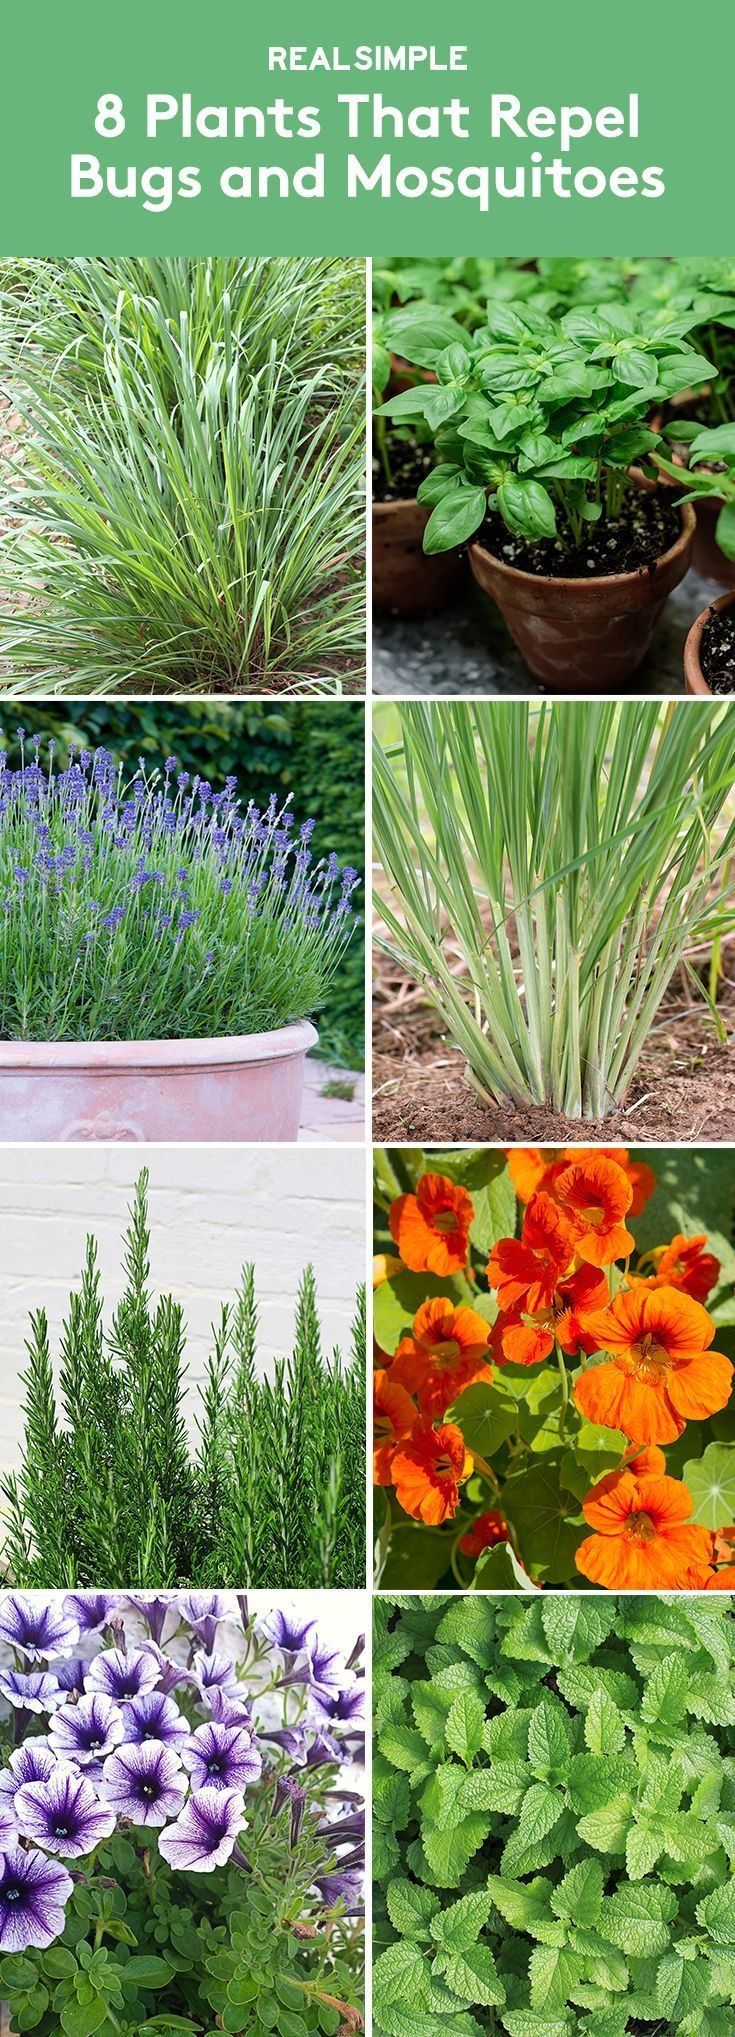 8 Plants That Repel Bugs and Mosquitoes -   25 outdoor garden decoracion
 ideas